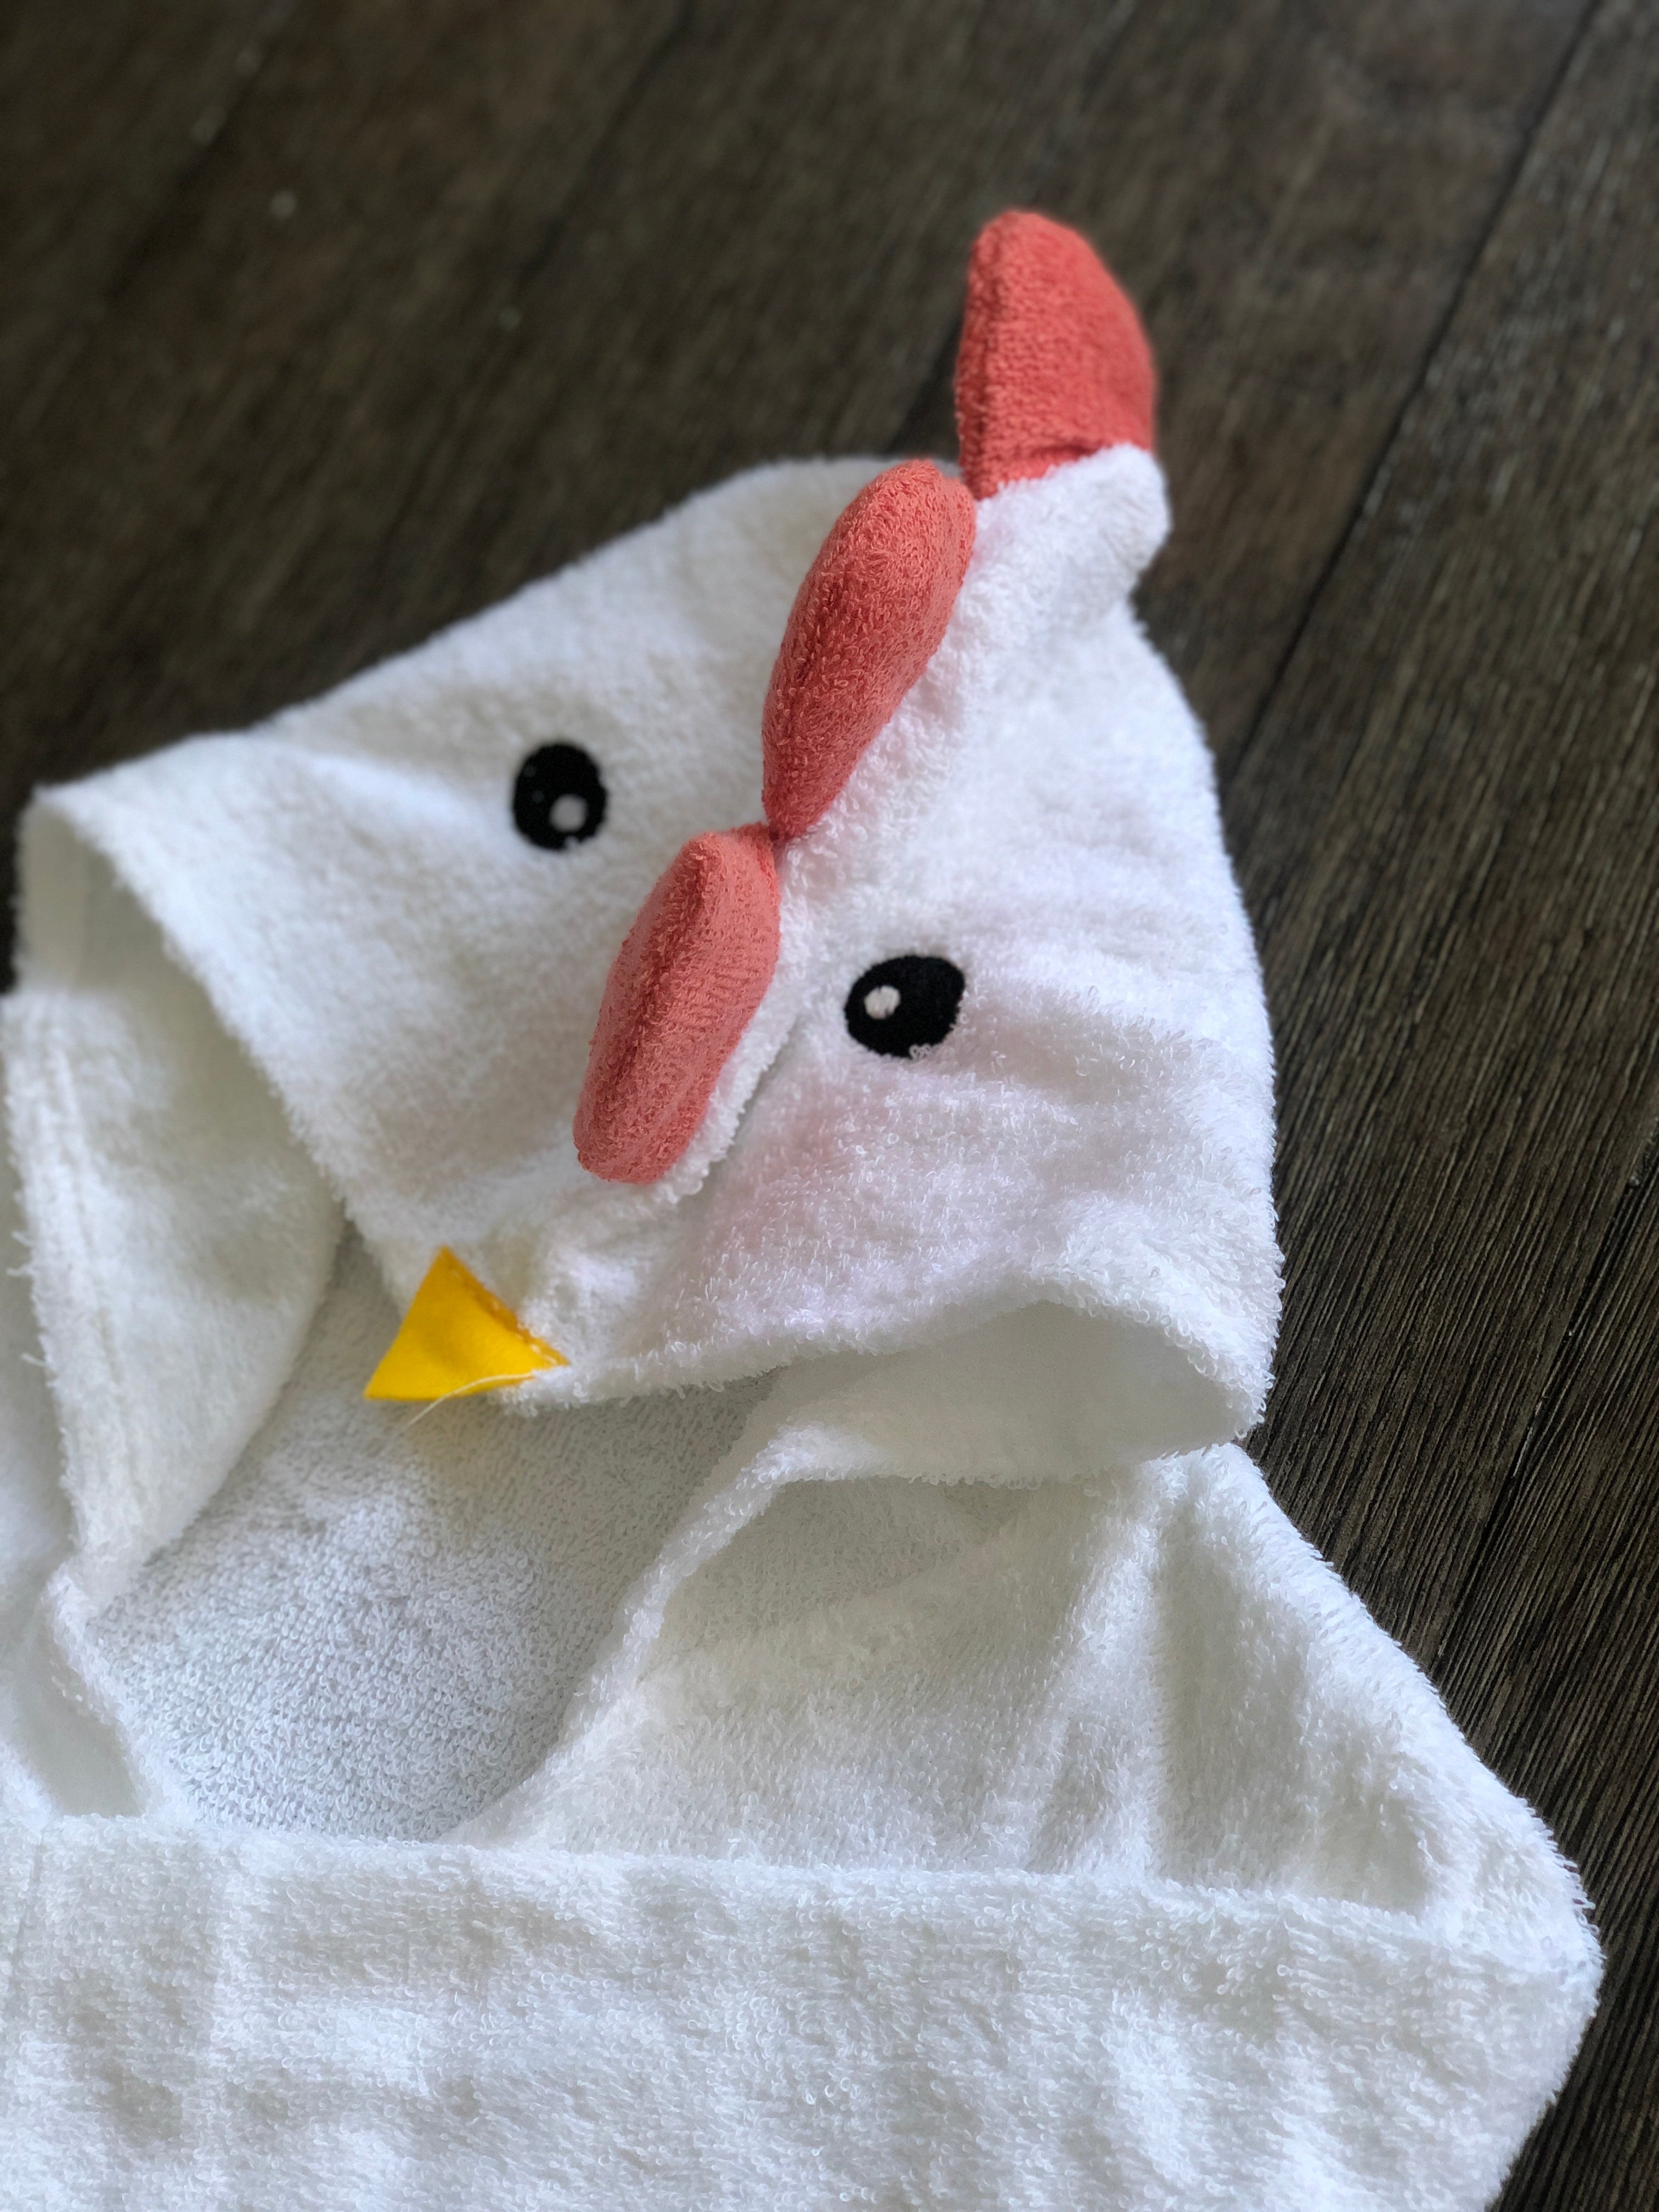 Hooded Bath Robe (White Rooster)